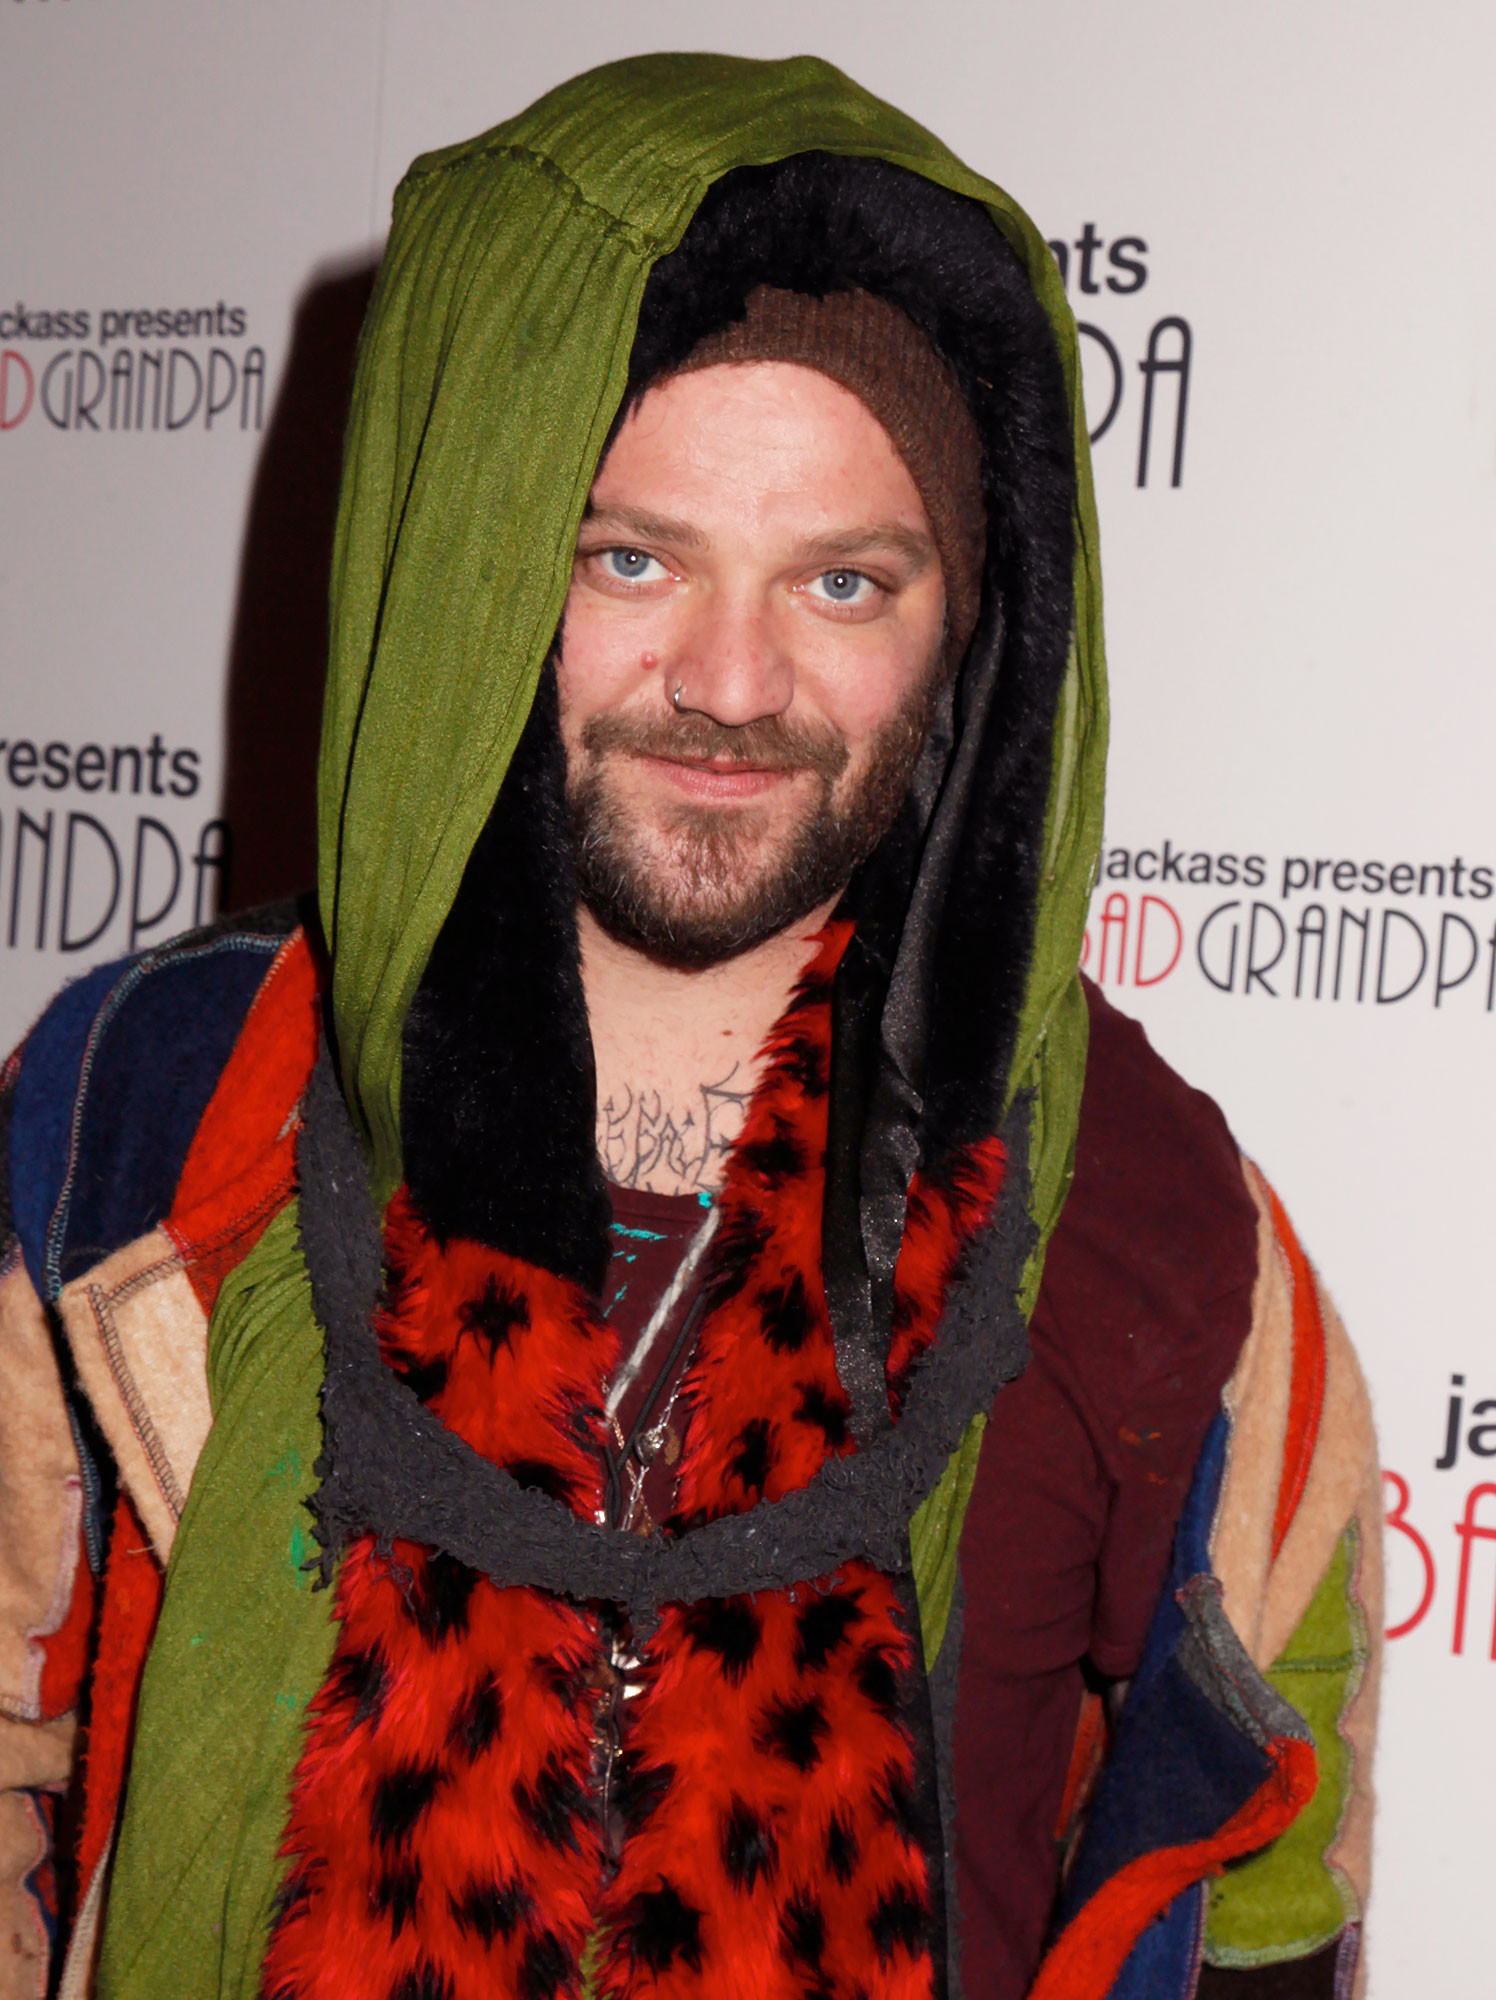 Bam Margera hospitalized for a staph infection after weeks of troubling  behavior  Daily Mail Online